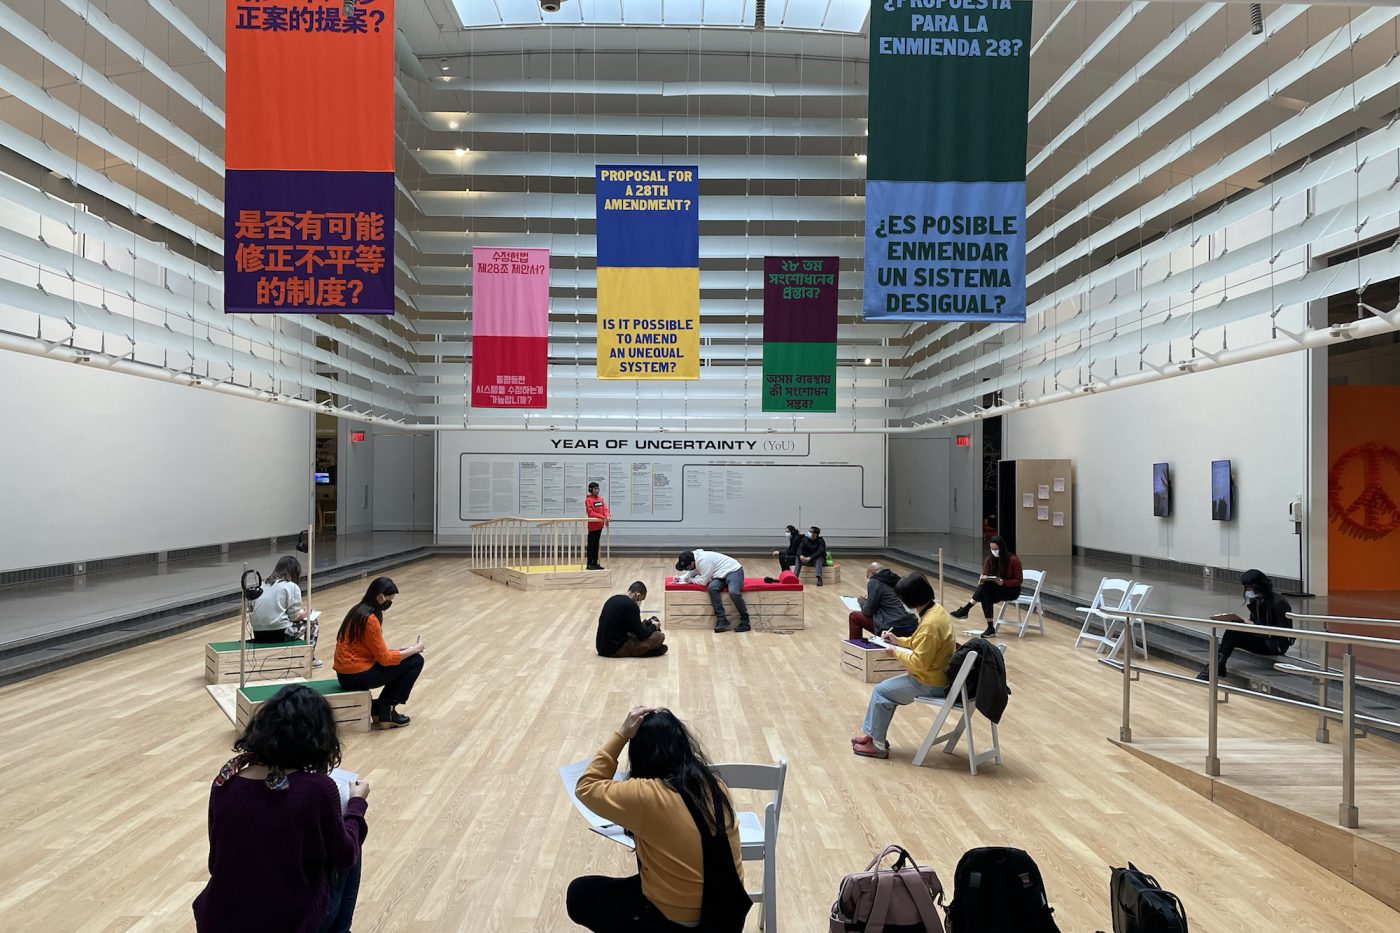 Image of Alex Strada and Tali Keren's installation Proposal for a 28th Amendment? Is it Possible to Amend an Unequal System? presented in the Queens Museum's atrium. Five colorful banners are hanging from the ceiling, with the exhibition's title in different languages. Various visitors are engaging with the installation's different elements while sitting and standing.